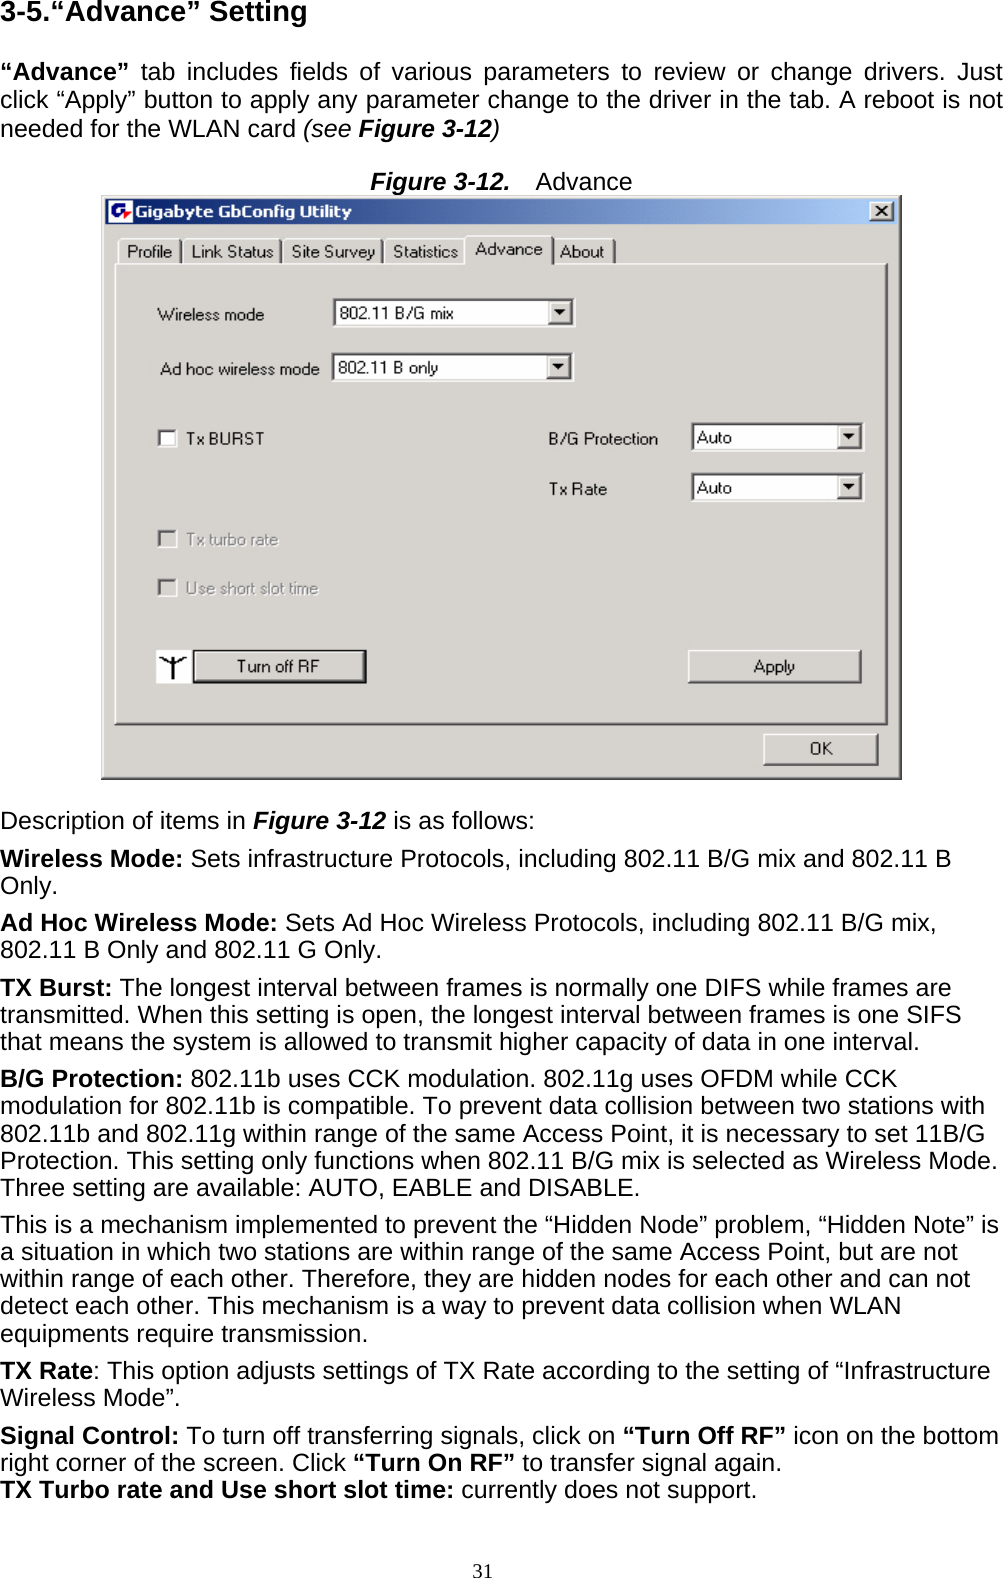 3-5.“Advance” Setting  “Advance” tab includes fields of various parameters to review or change drivers. Just click “Apply” button to apply any parameter change to the driver in the tab. A reboot is not needed for the WLAN card (see Figure 3-12)  Figure 3-12.   Advance   Description of items in Figure 3-12 is as follows: Wireless Mode: Sets infrastructure Protocols, including 802.11 B/G mix and 802.11 B Only. Ad Hoc Wireless Mode: Sets Ad Hoc Wireless Protocols, including 802.11 B/G mix, 802.11 B Only and 802.11 G Only. TX Burst: The longest interval between frames is normally one DIFS while frames are transmitted. When this setting is open, the longest interval between frames is one SIFS that means the system is allowed to transmit higher capacity of data in one interval. B/G Protection: 802.11b uses CCK modulation. 802.11g uses OFDM while CCK modulation for 802.11b is compatible. To prevent data collision between two stations with 802.11b and 802.11g within range of the same Access Point, it is necessary to set 11B/G Protection. This setting only functions when 802.11 B/G mix is selected as Wireless Mode. Three setting are available: AUTO, EABLE and DISABLE. This is a mechanism implemented to prevent the “Hidden Node” problem, “Hidden Note” is a situation in which two stations are within range of the same Access Point, but are not within range of each other. Therefore, they are hidden nodes for each other and can not detect each other. This mechanism is a way to prevent data collision when WLAN equipments require transmission. TX Rate: This option adjusts settings of TX Rate according to the setting of “Infrastructure Wireless Mode”. Signal Control: To turn off transferring signals, click on “Turn Off RF” icon on the bottom right corner of the screen. Click “Turn On RF” to transfer signal again. TX Turbo rate and Use short slot time: currently does not support. 31   